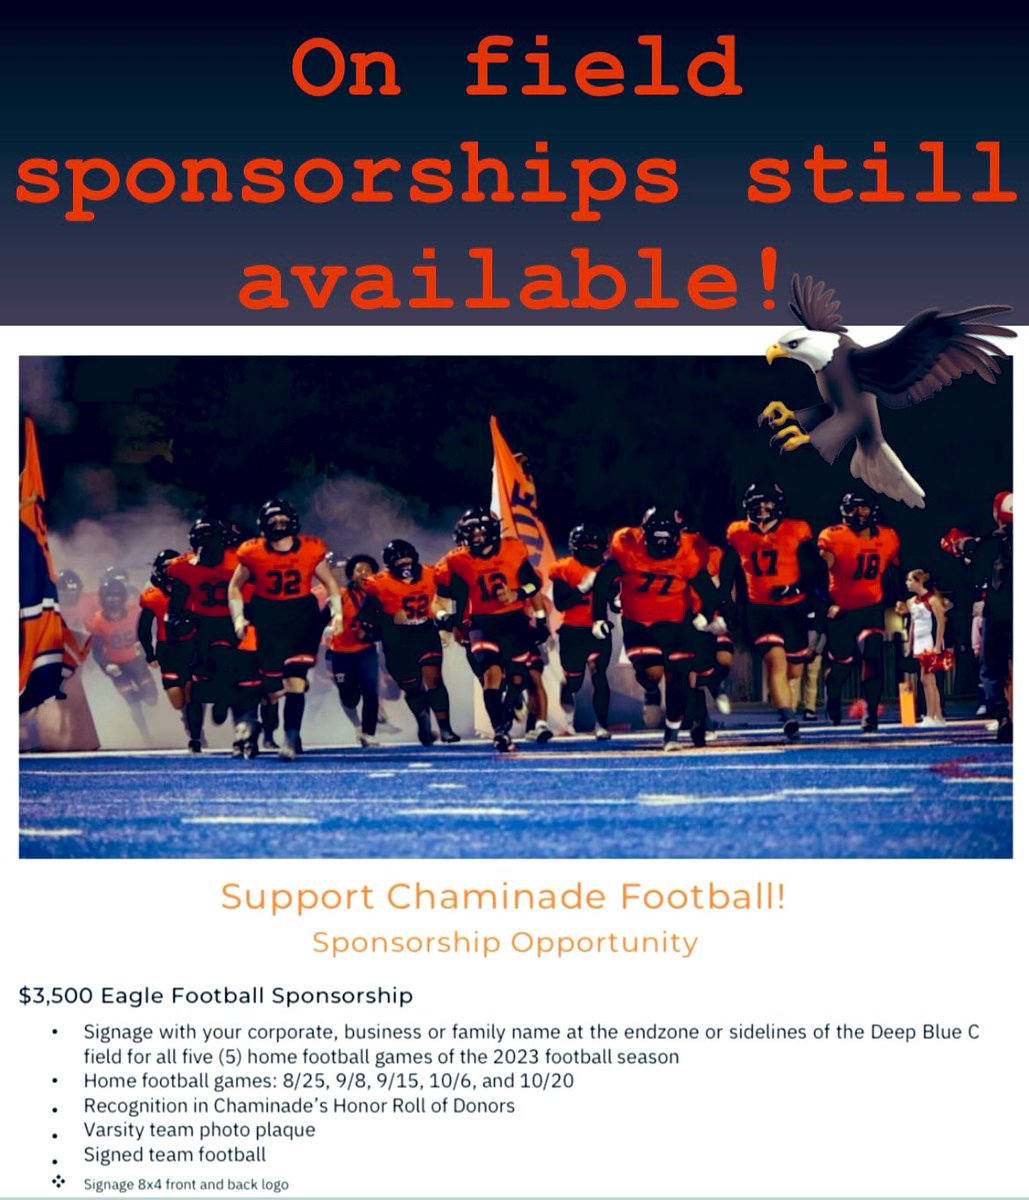 Please email chaminadefb@gmail.com with any questions.